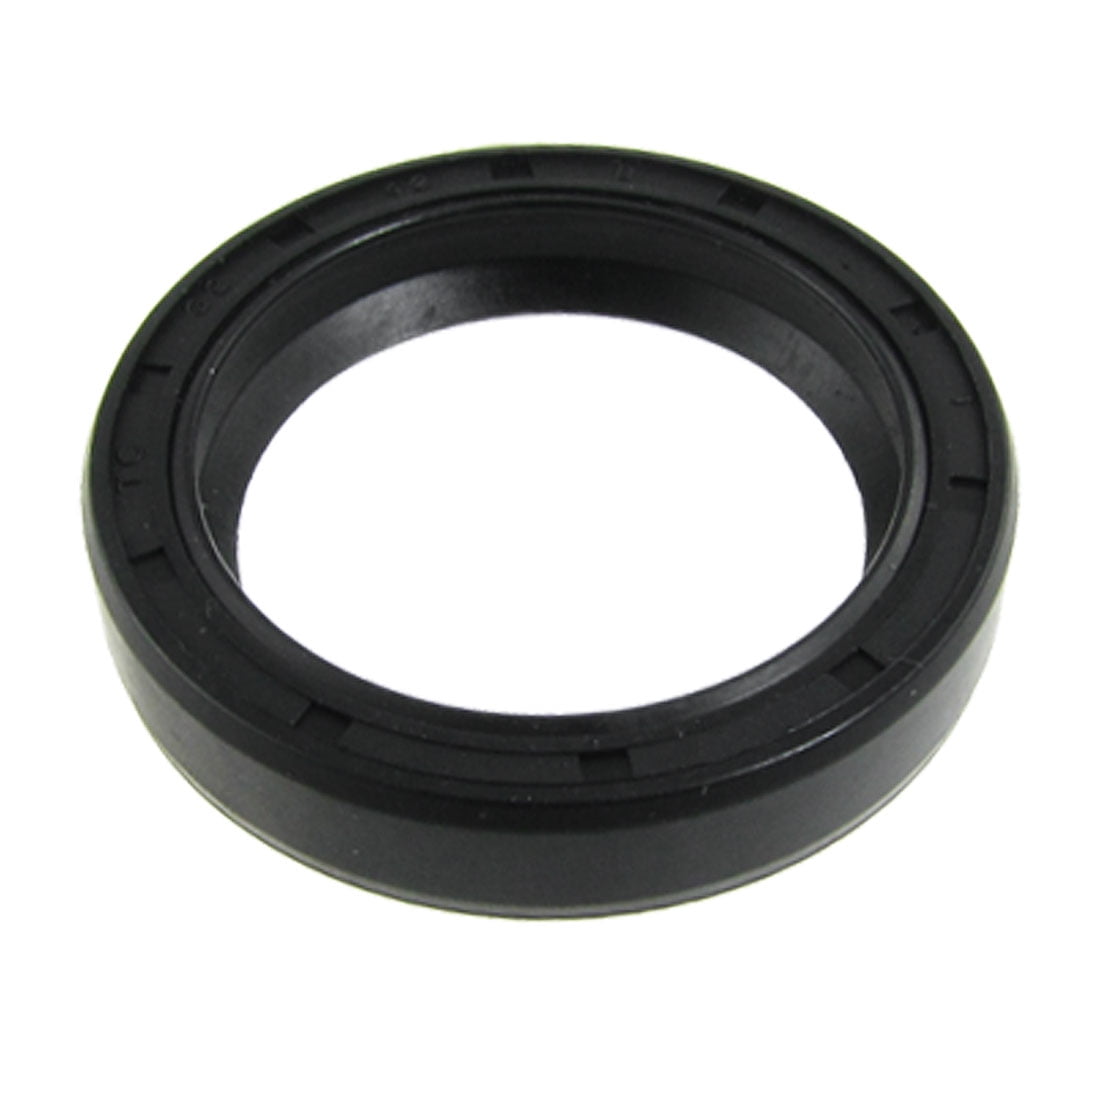 Metric Oil Shaft Seal 25 x 37 x 6mm Double Lip  Price for 1 pc